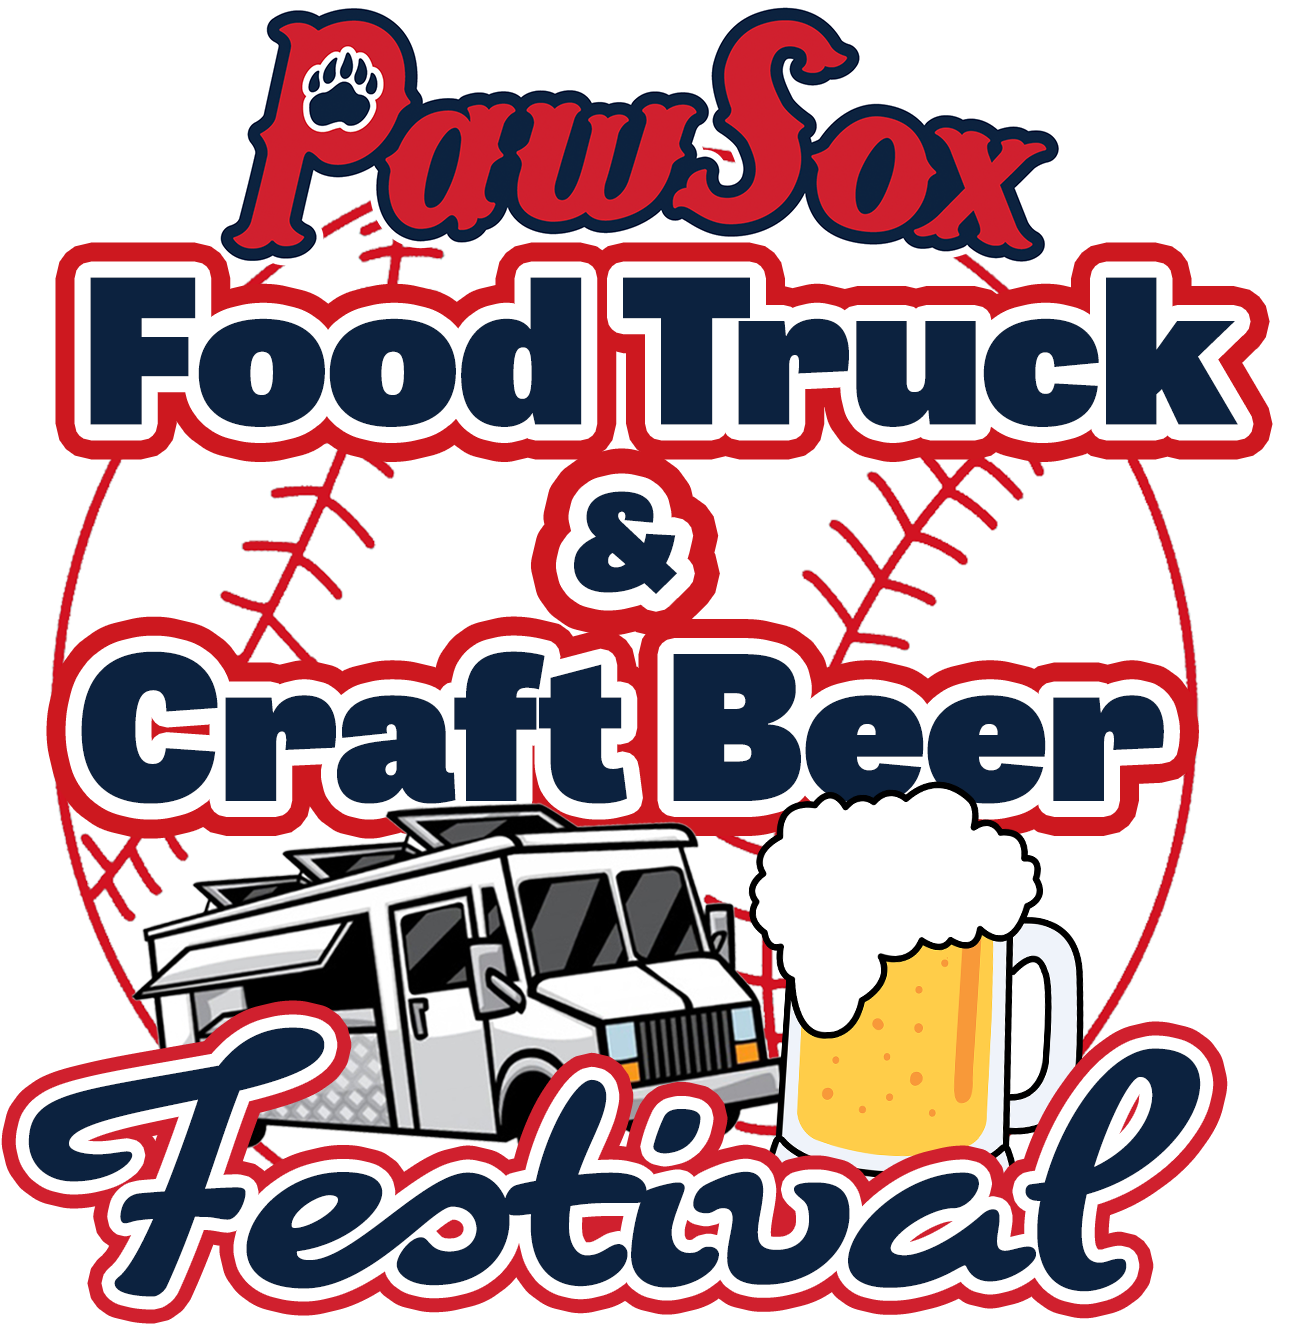 Pawsox Food Truck & Craft Beer Festival 09 15 - Pawtucket Red Sox (1500x1500)